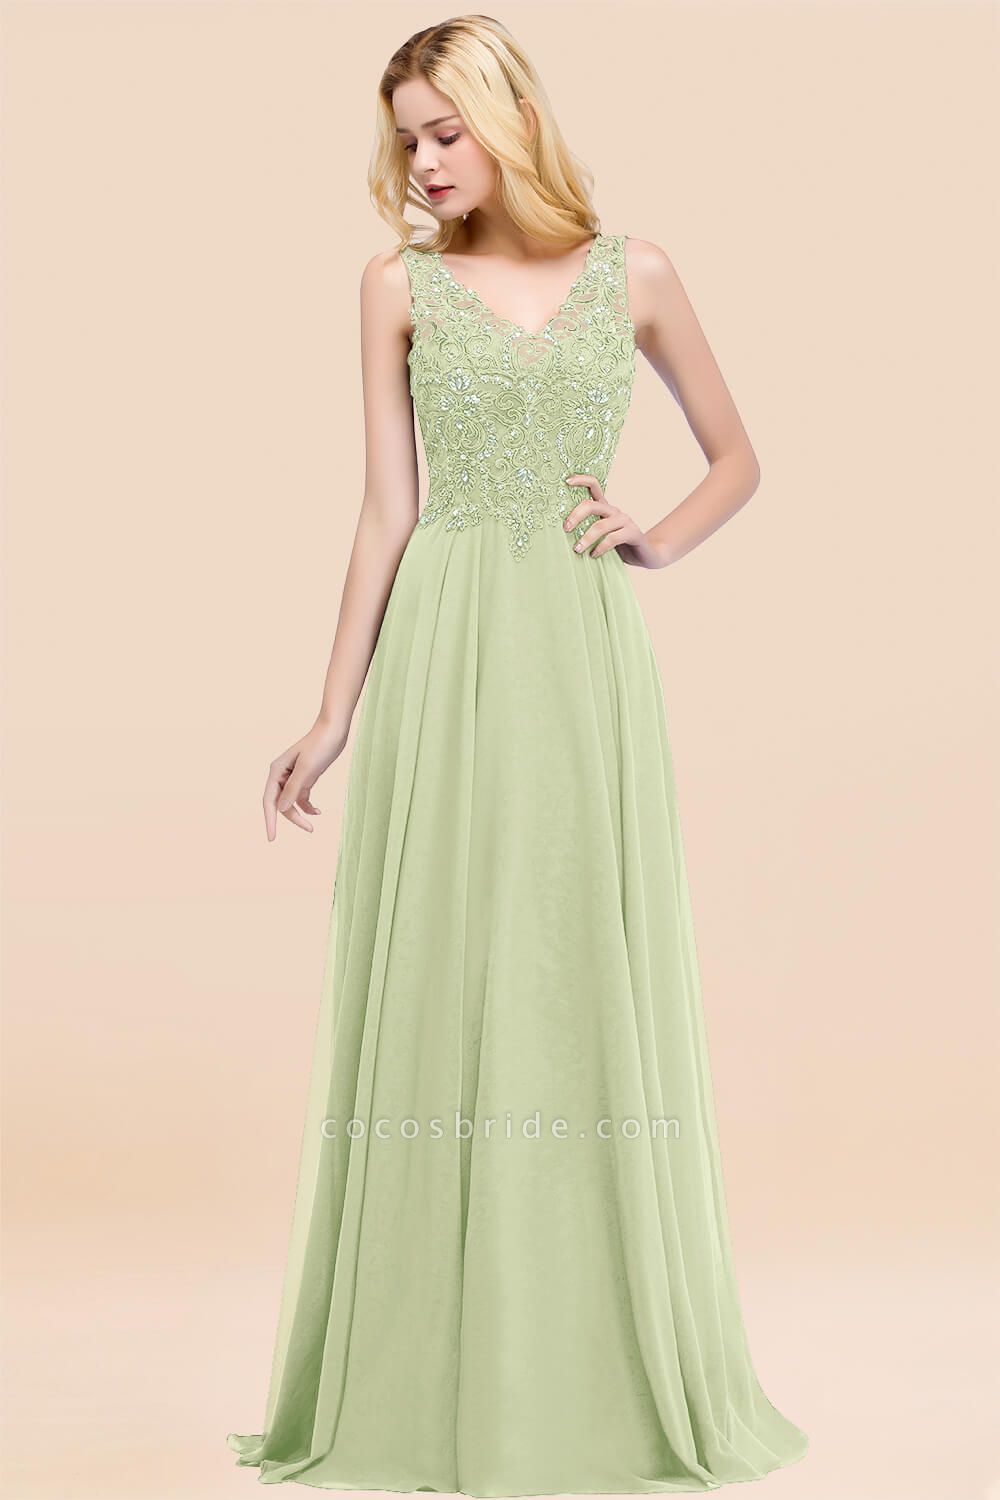 A-line Chiffon Appliques V-neck Sleeveless Floor-Length Bridesmaid Dresses with Crystals